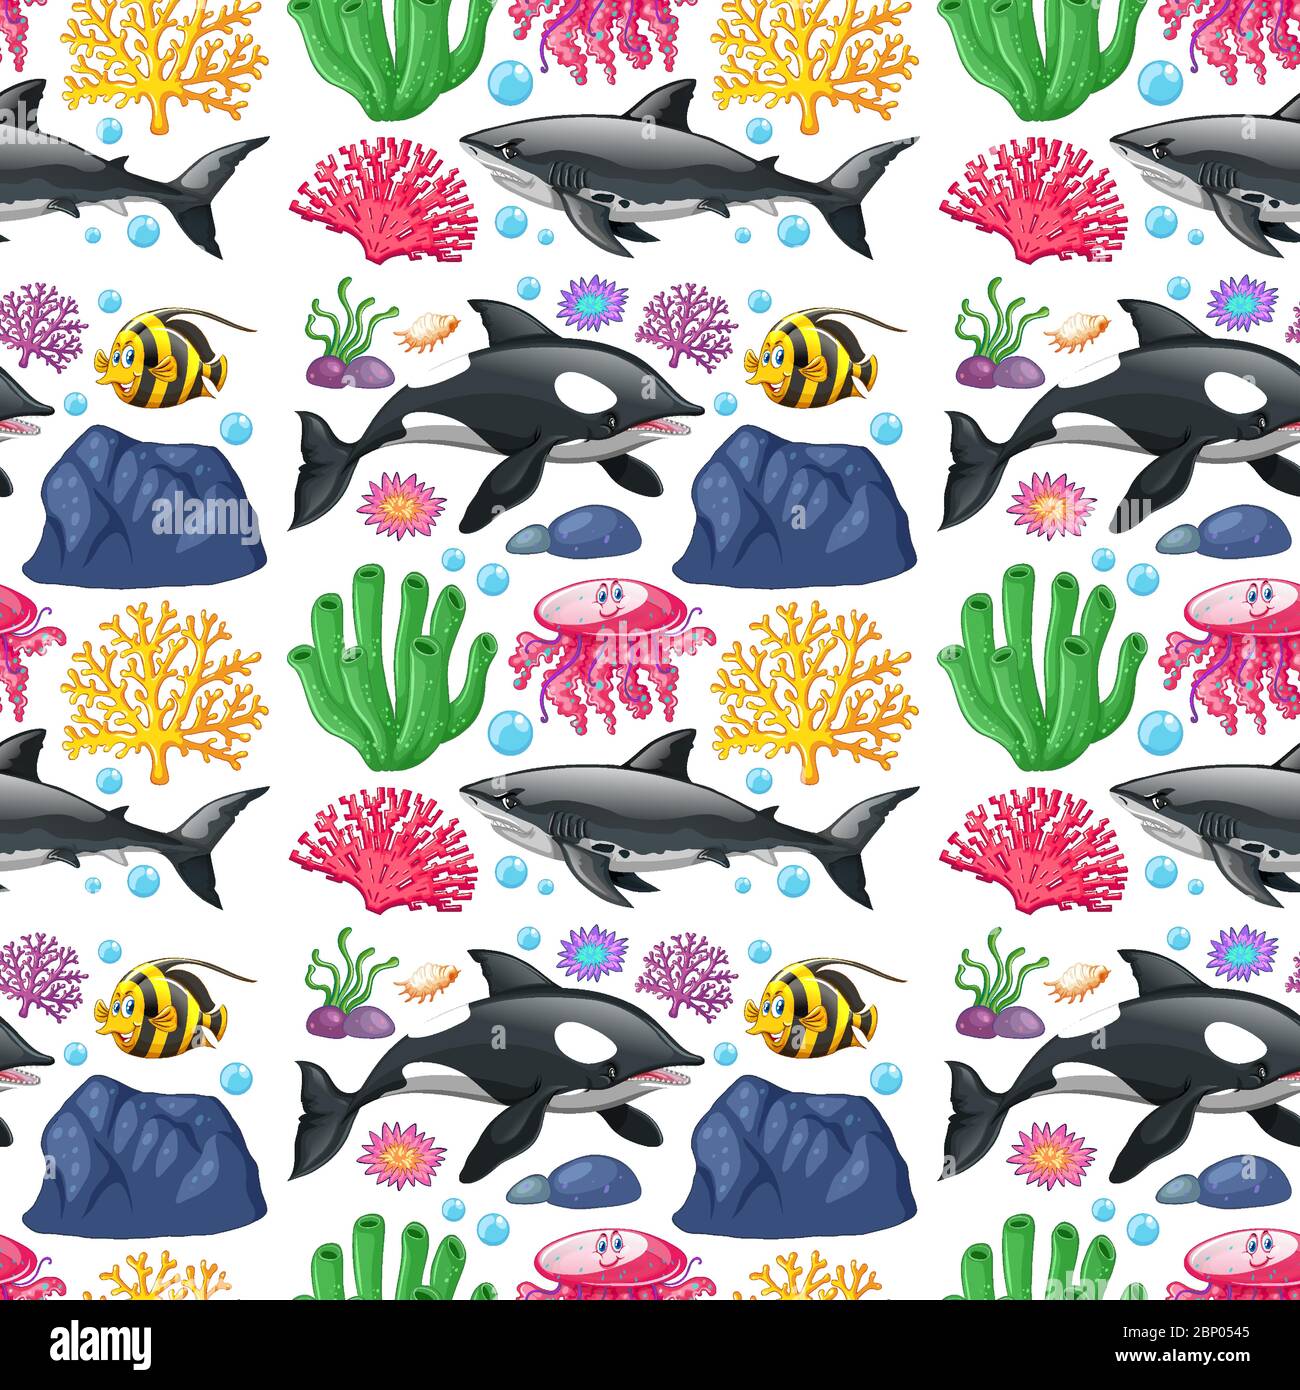 Seamless background design with sea creatures illustration Stock Vector